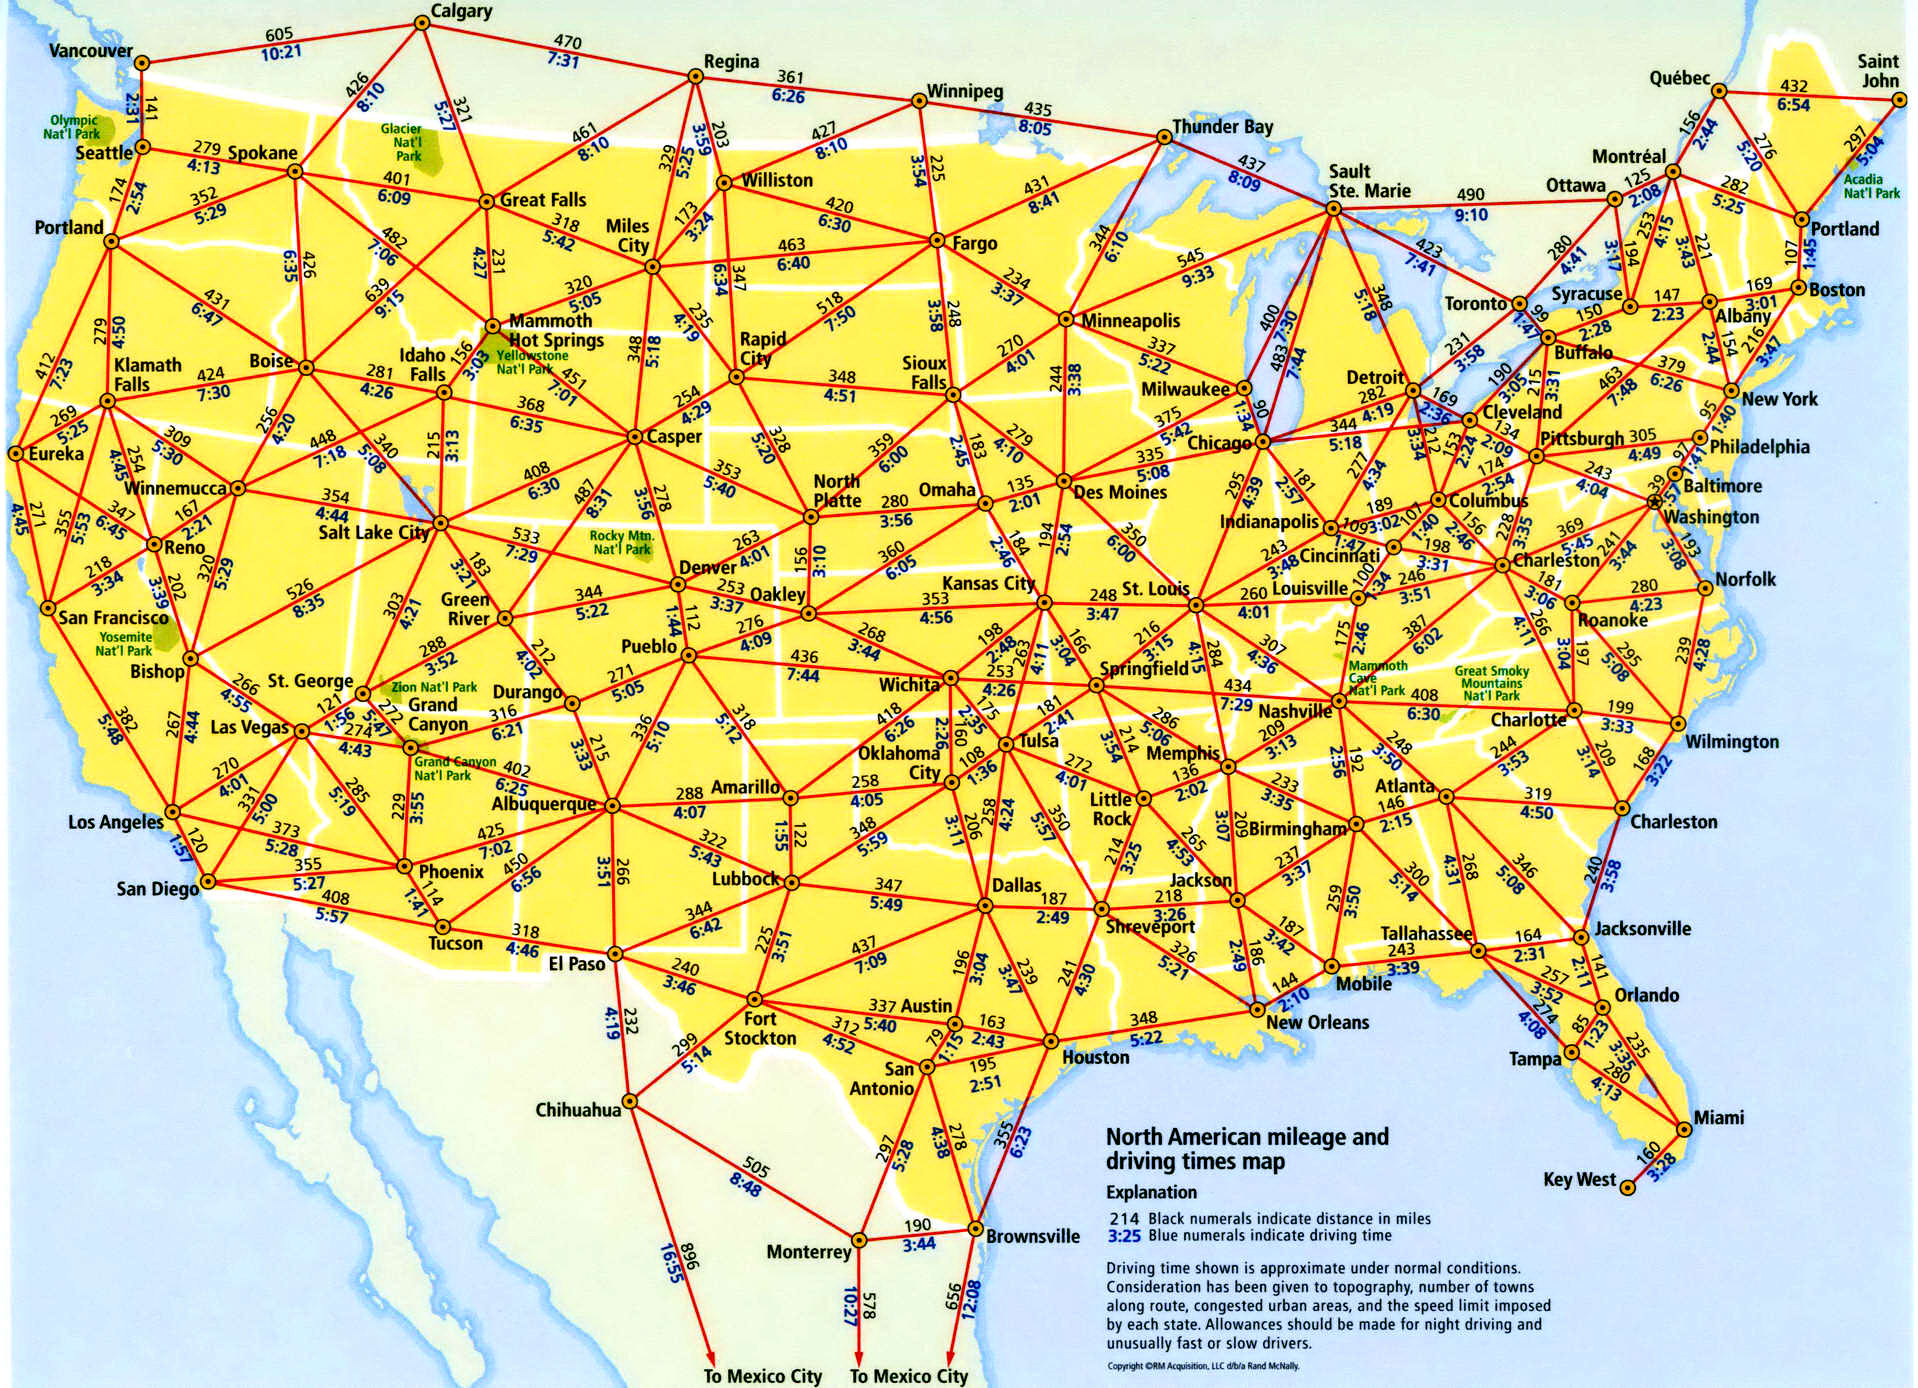 USA Mileage and Driving times map